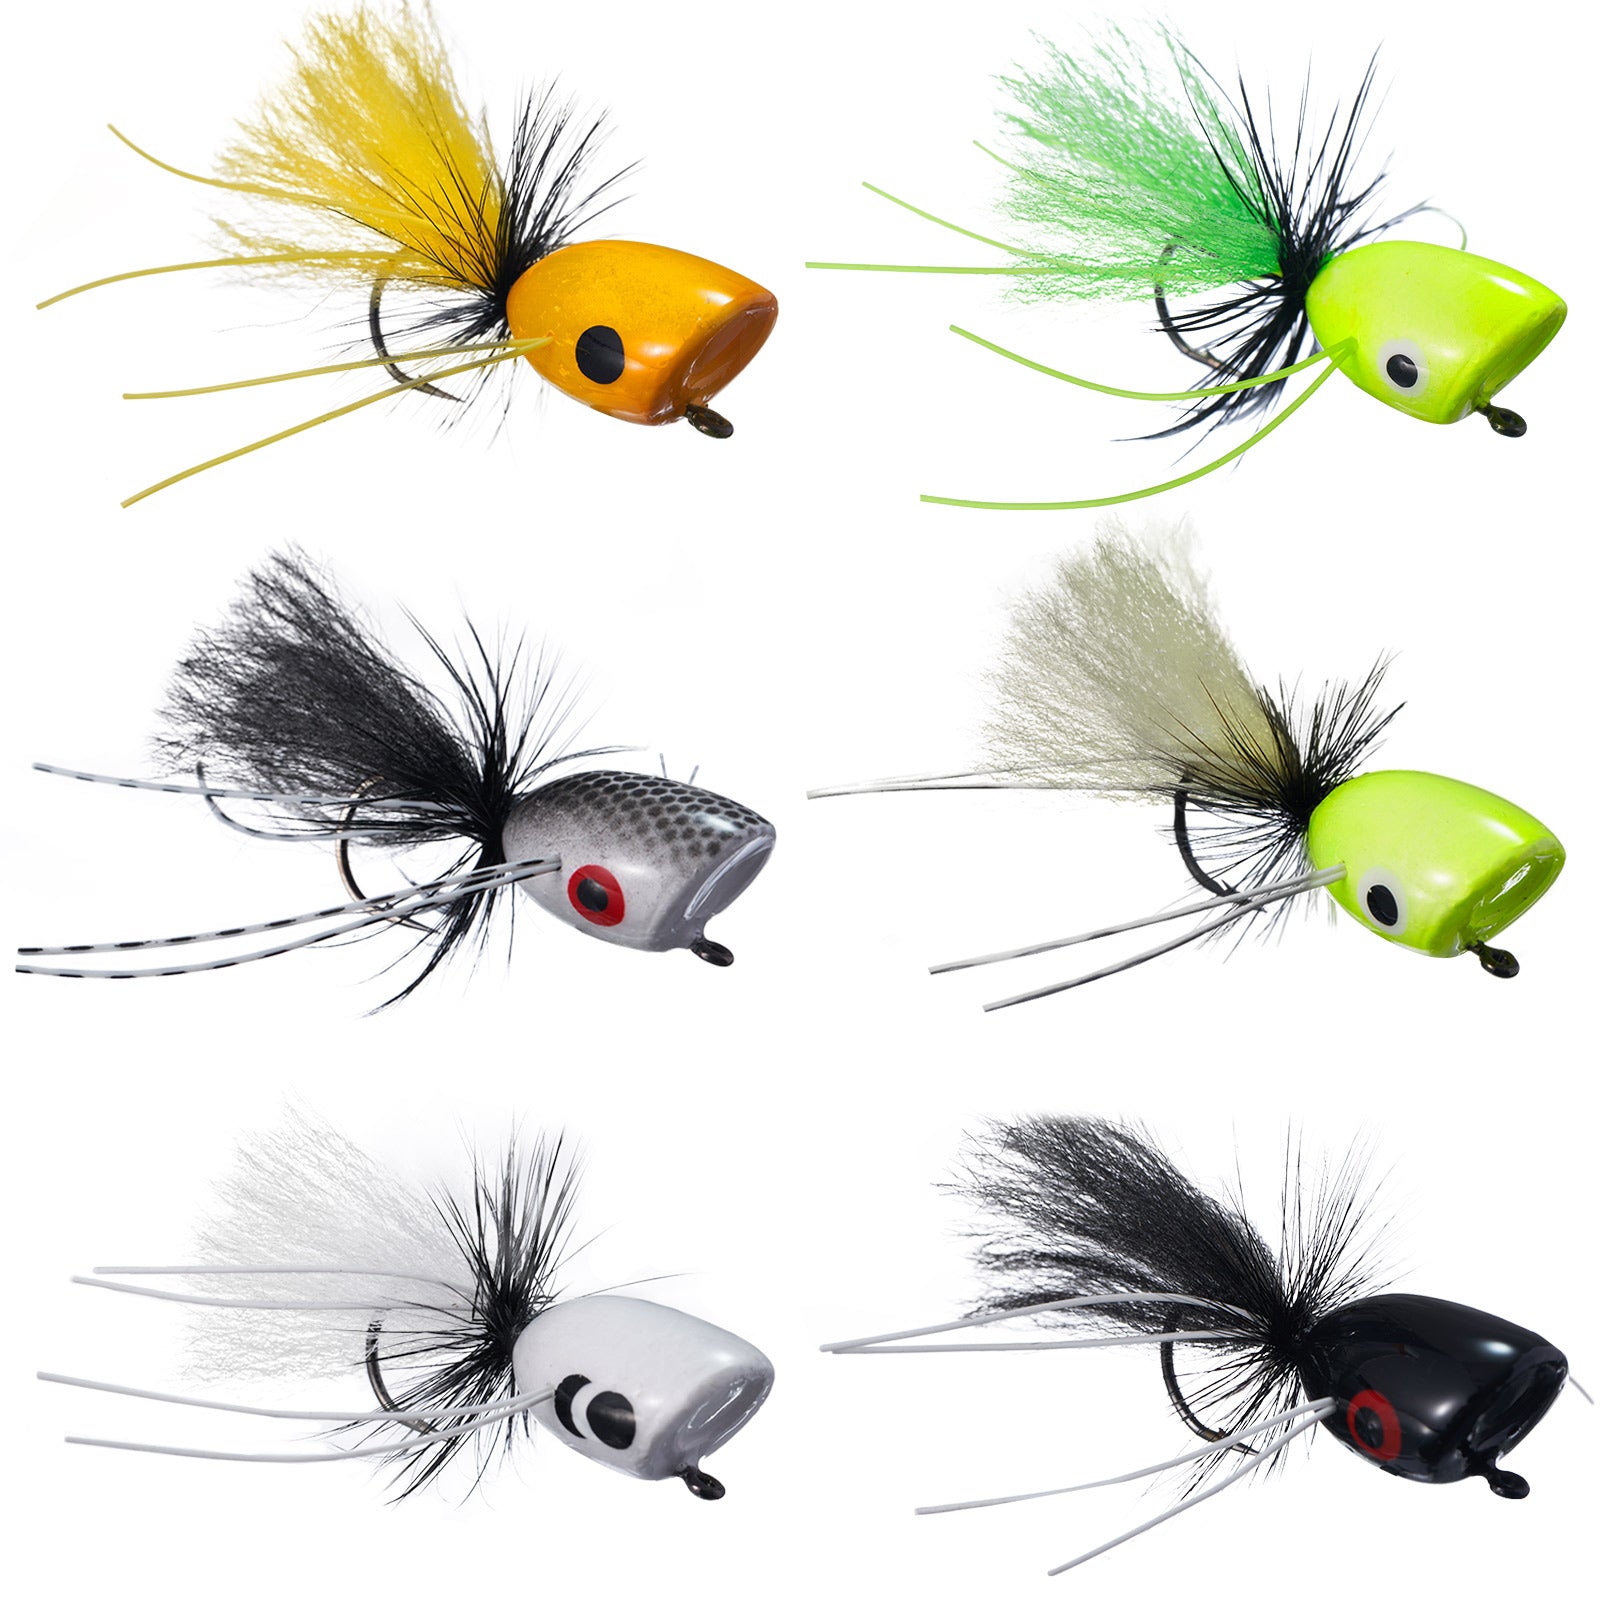 Top water fly fishing poppers